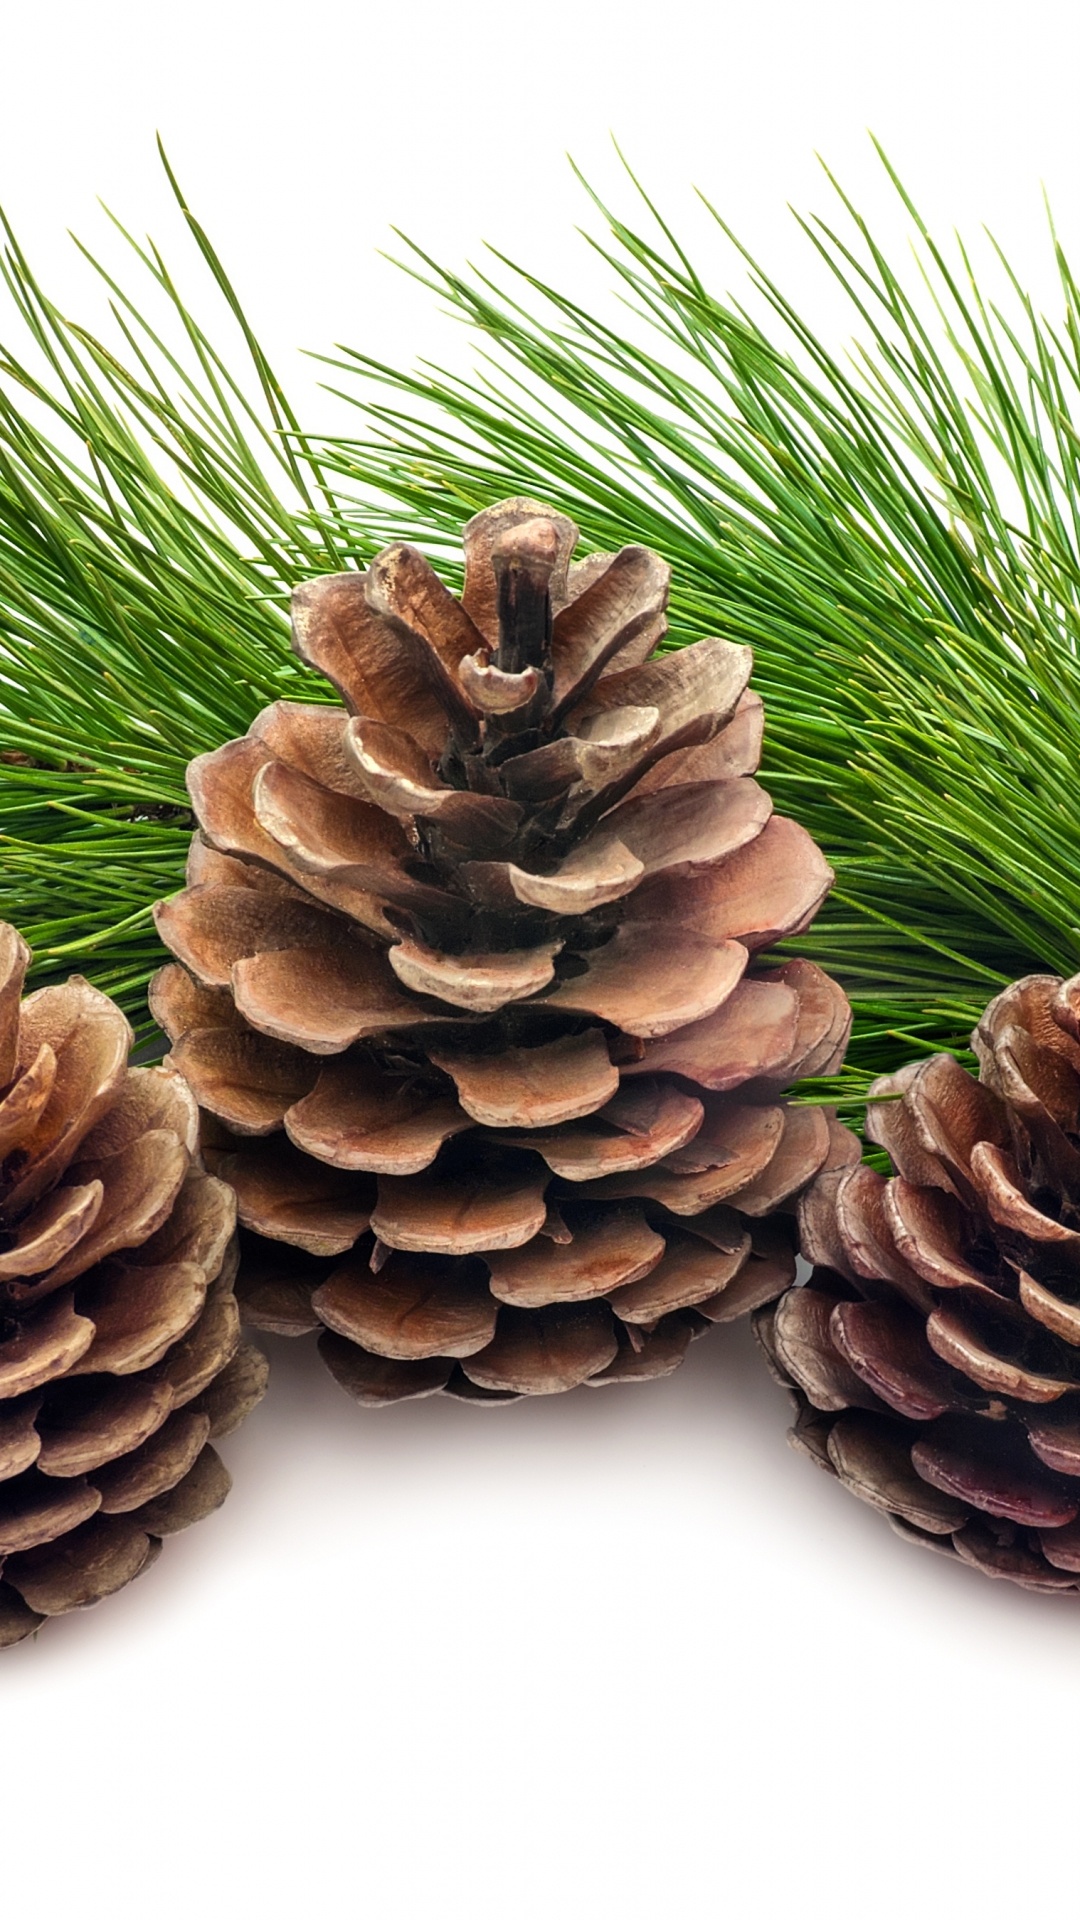 Brown Pine Cone on White Background. Wallpaper in 1080x1920 Resolution